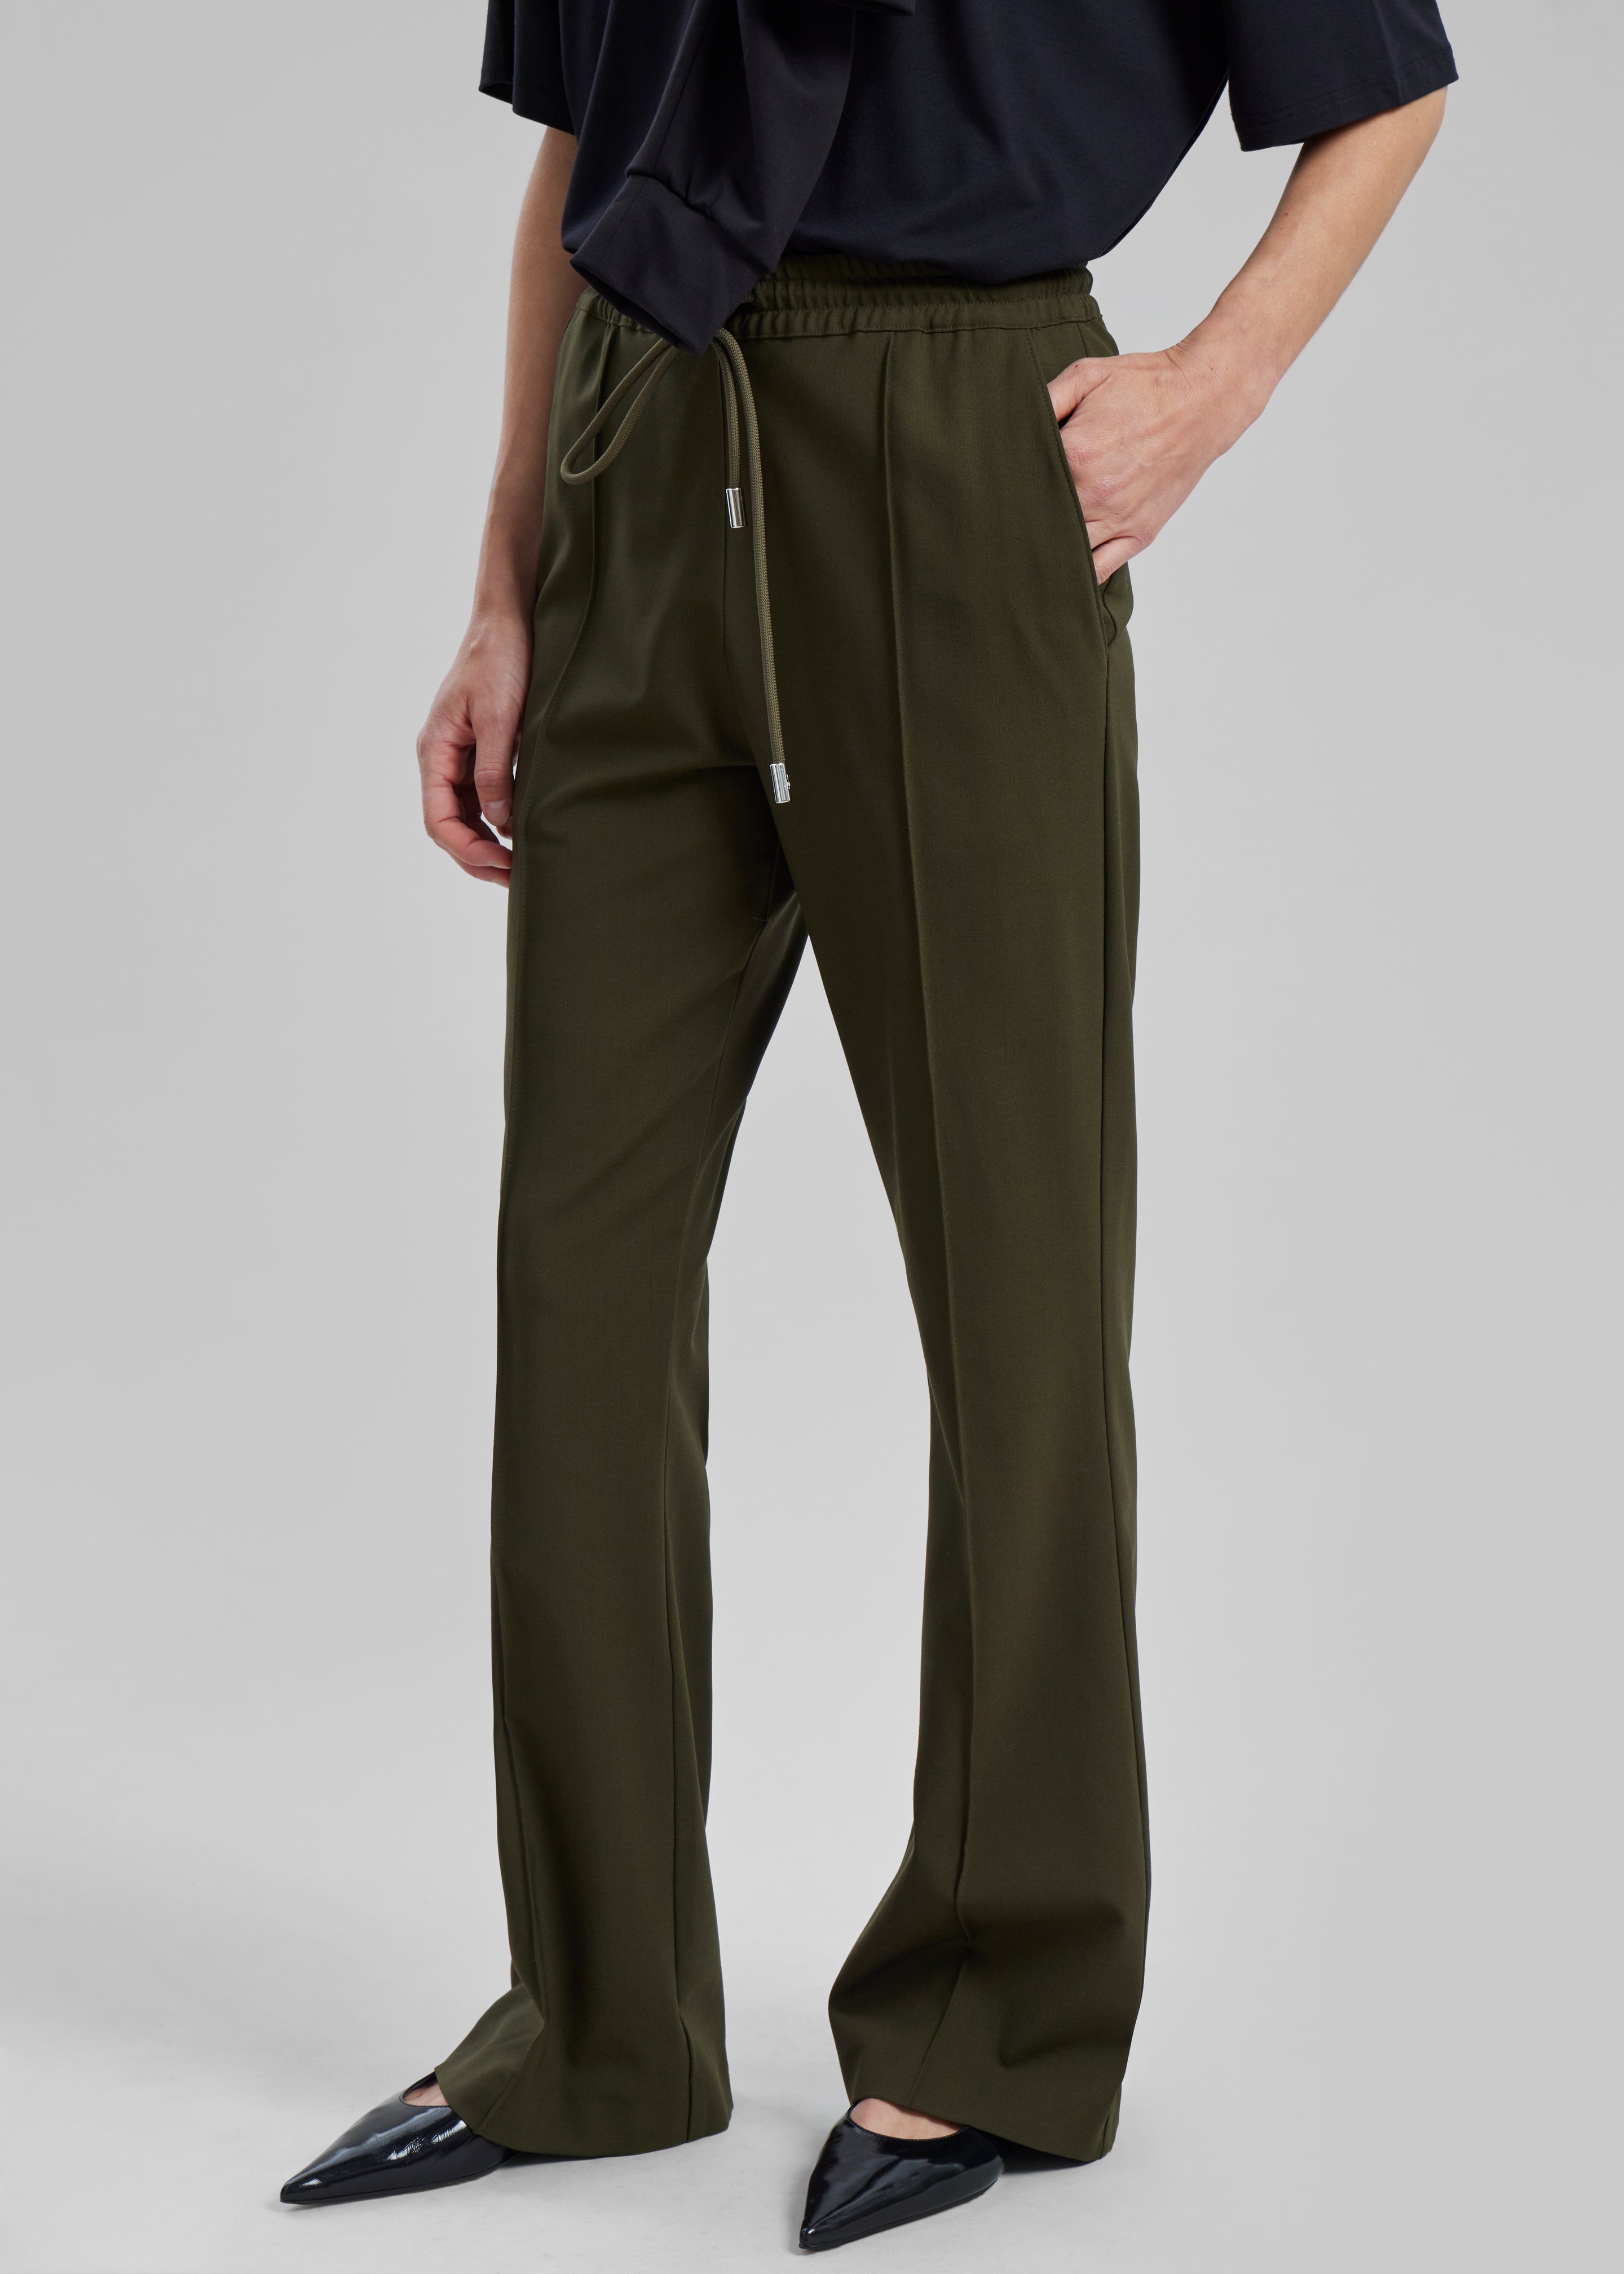 JW Anderson Drawstring Waist Tailored Trousers - Olive - 5